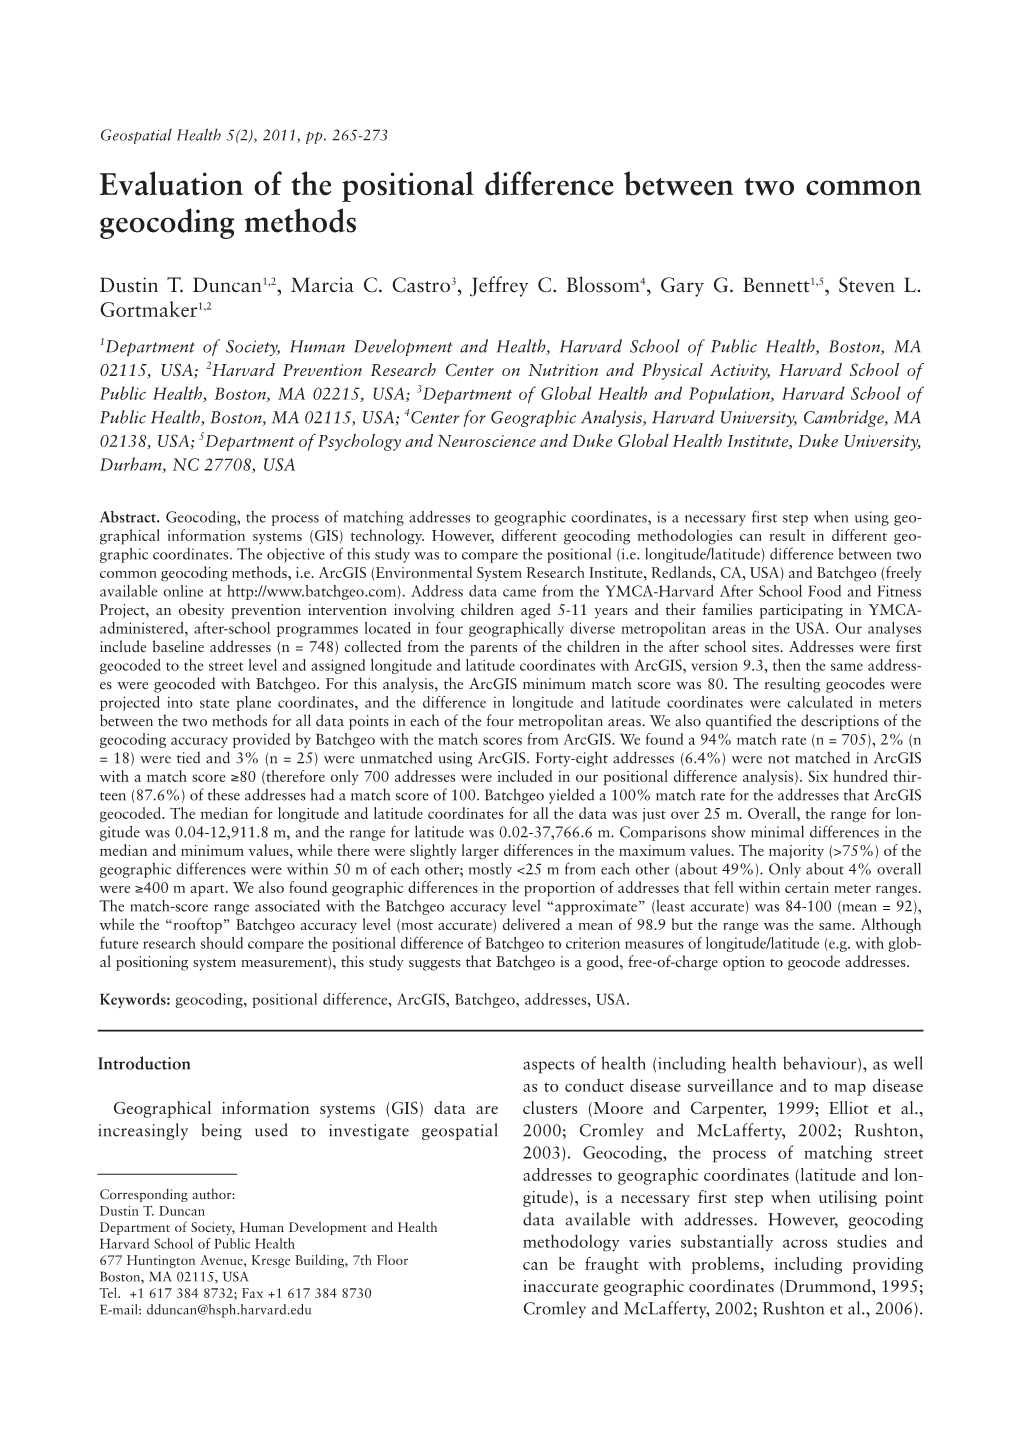 Evaluation of the Positional Difference Between Two Common Geocoding Methods